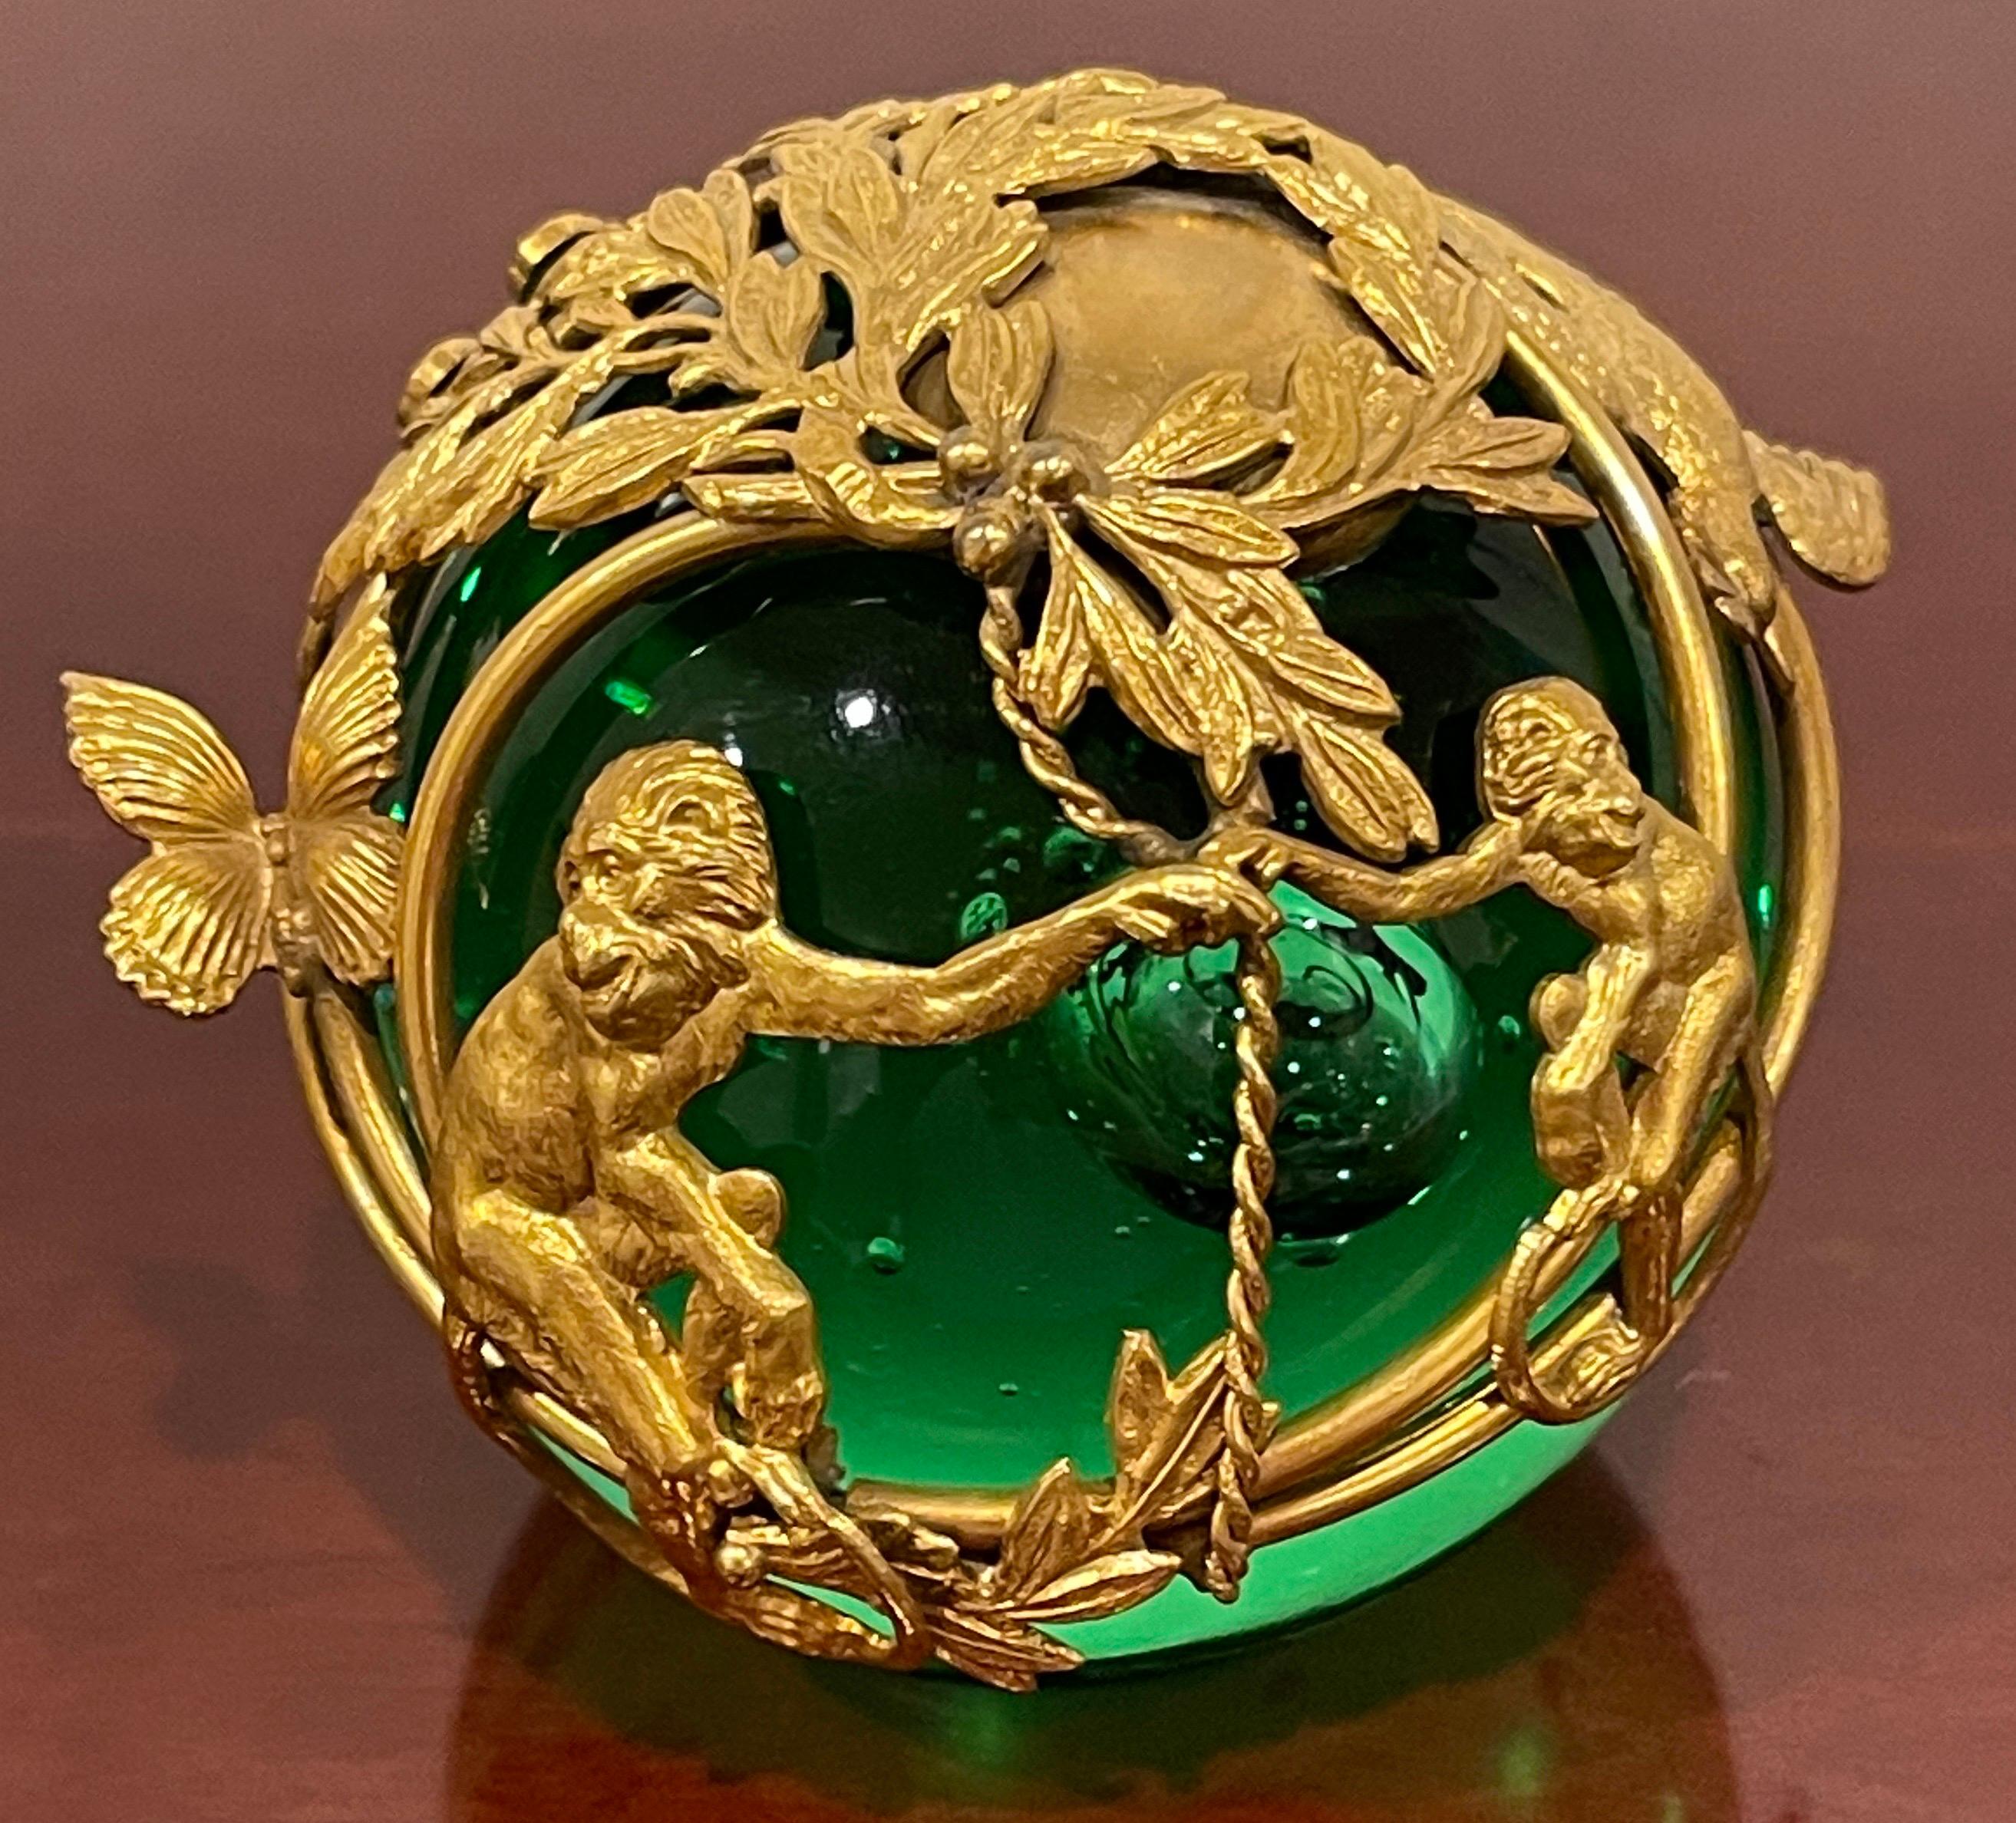 French Ormolu monkey motif green crystal controlled bubble paperweight.
France, Circa 1900s.
An extraordinary work, with fine cast ormolu mounts with continuous frame depicting monkeys, birds, butterflies and an alligator in a landscape of